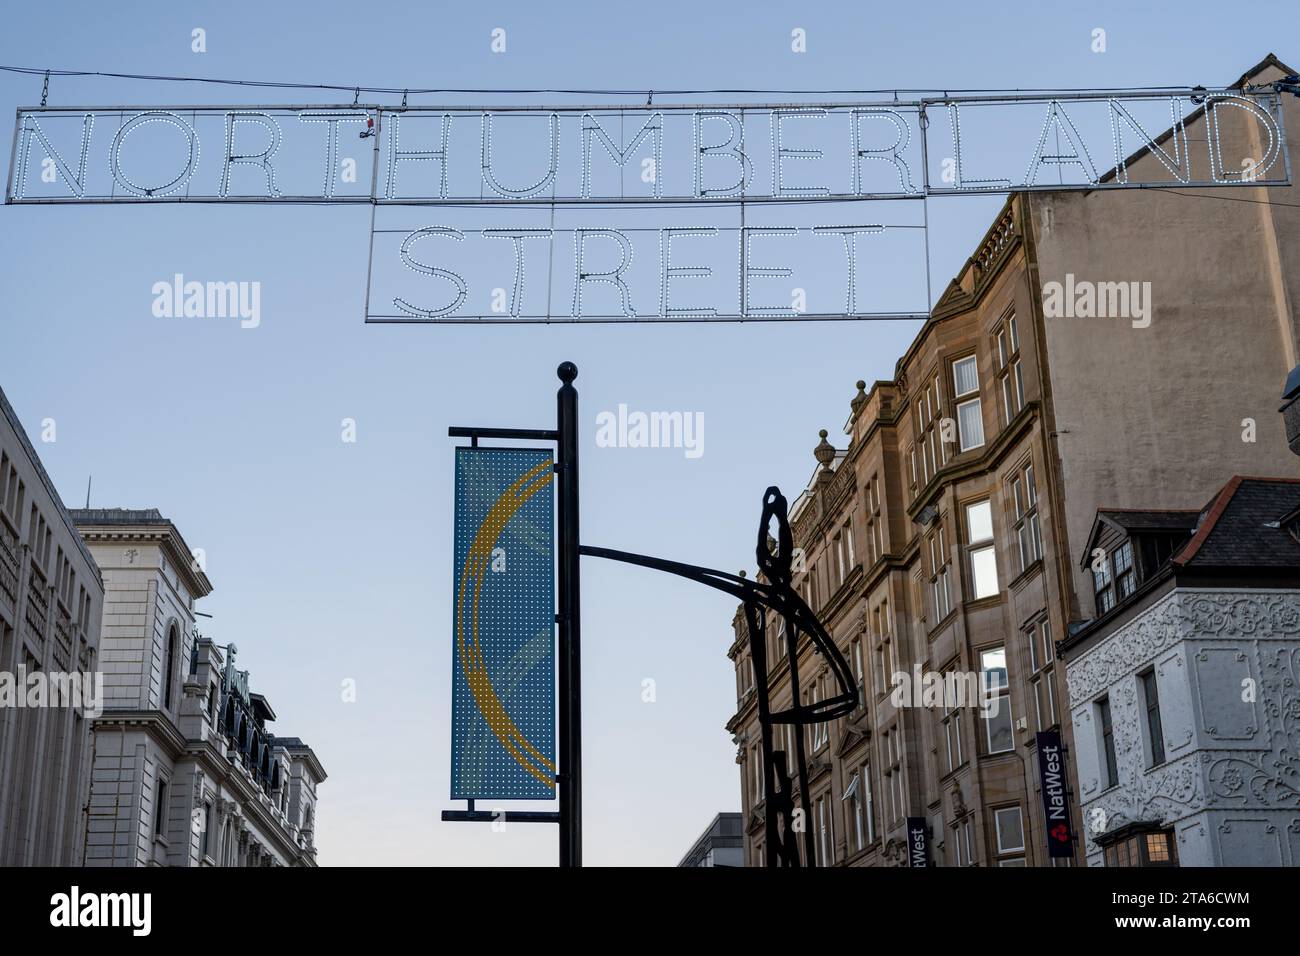 Sign at Northumberland Street, Newcastle upon Tyne, UK with the name in lights during Christmas shopping season. Economy concept. Stock Photo